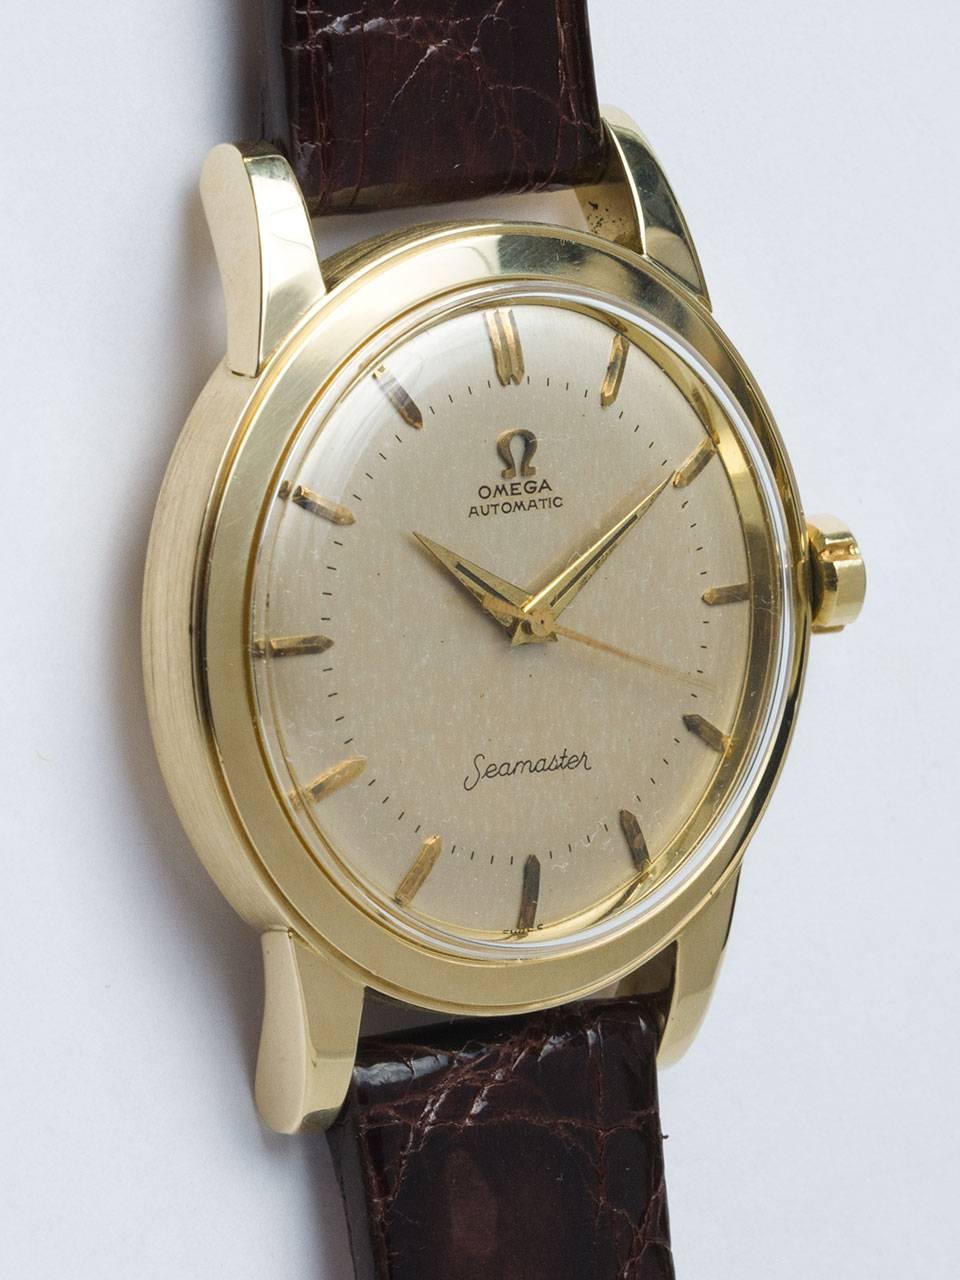 Omega 14K Yellow Gold Automatic circa 1950s. 35 x 43mm diameter case with wide bezel and screw down case back. Original silvered satin dial with raised patina'd gold indexes and gilt dauphine hands. Powered by calibre 354 bump automatic movement